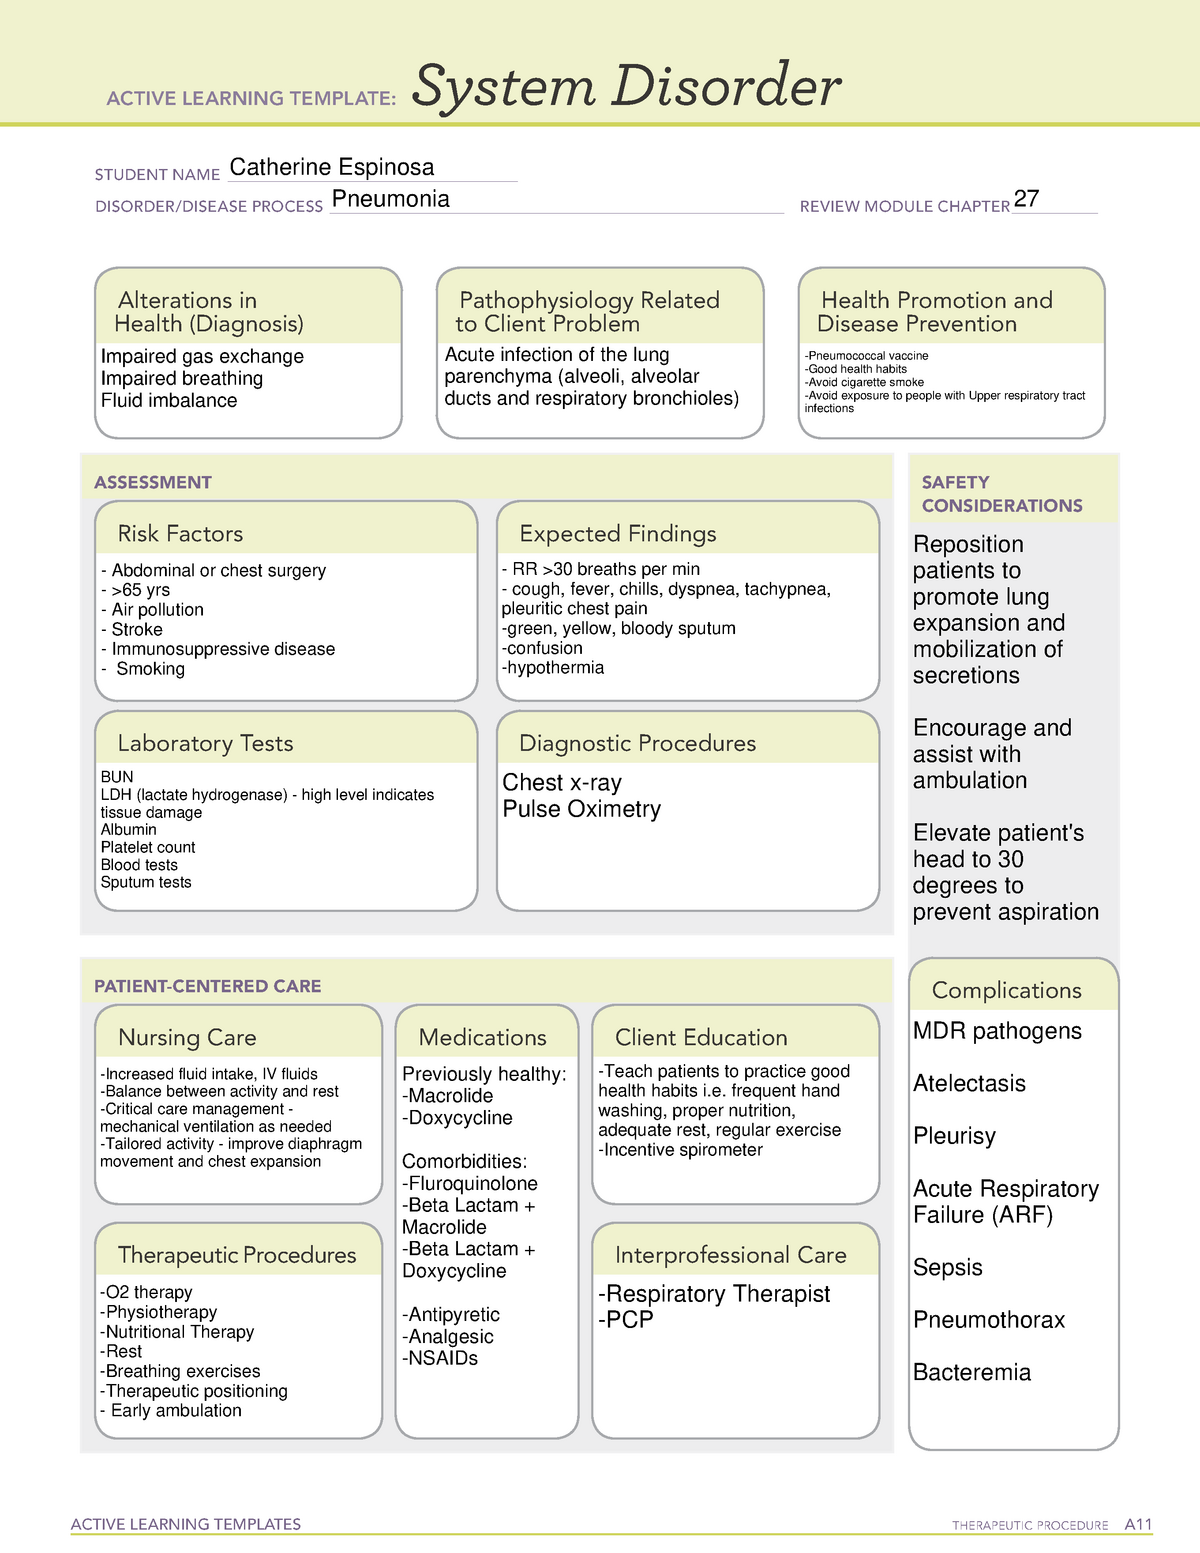 Pneumonia System Disorder ACTIVE LEARNING TEMPLATES THERAPEUTIC